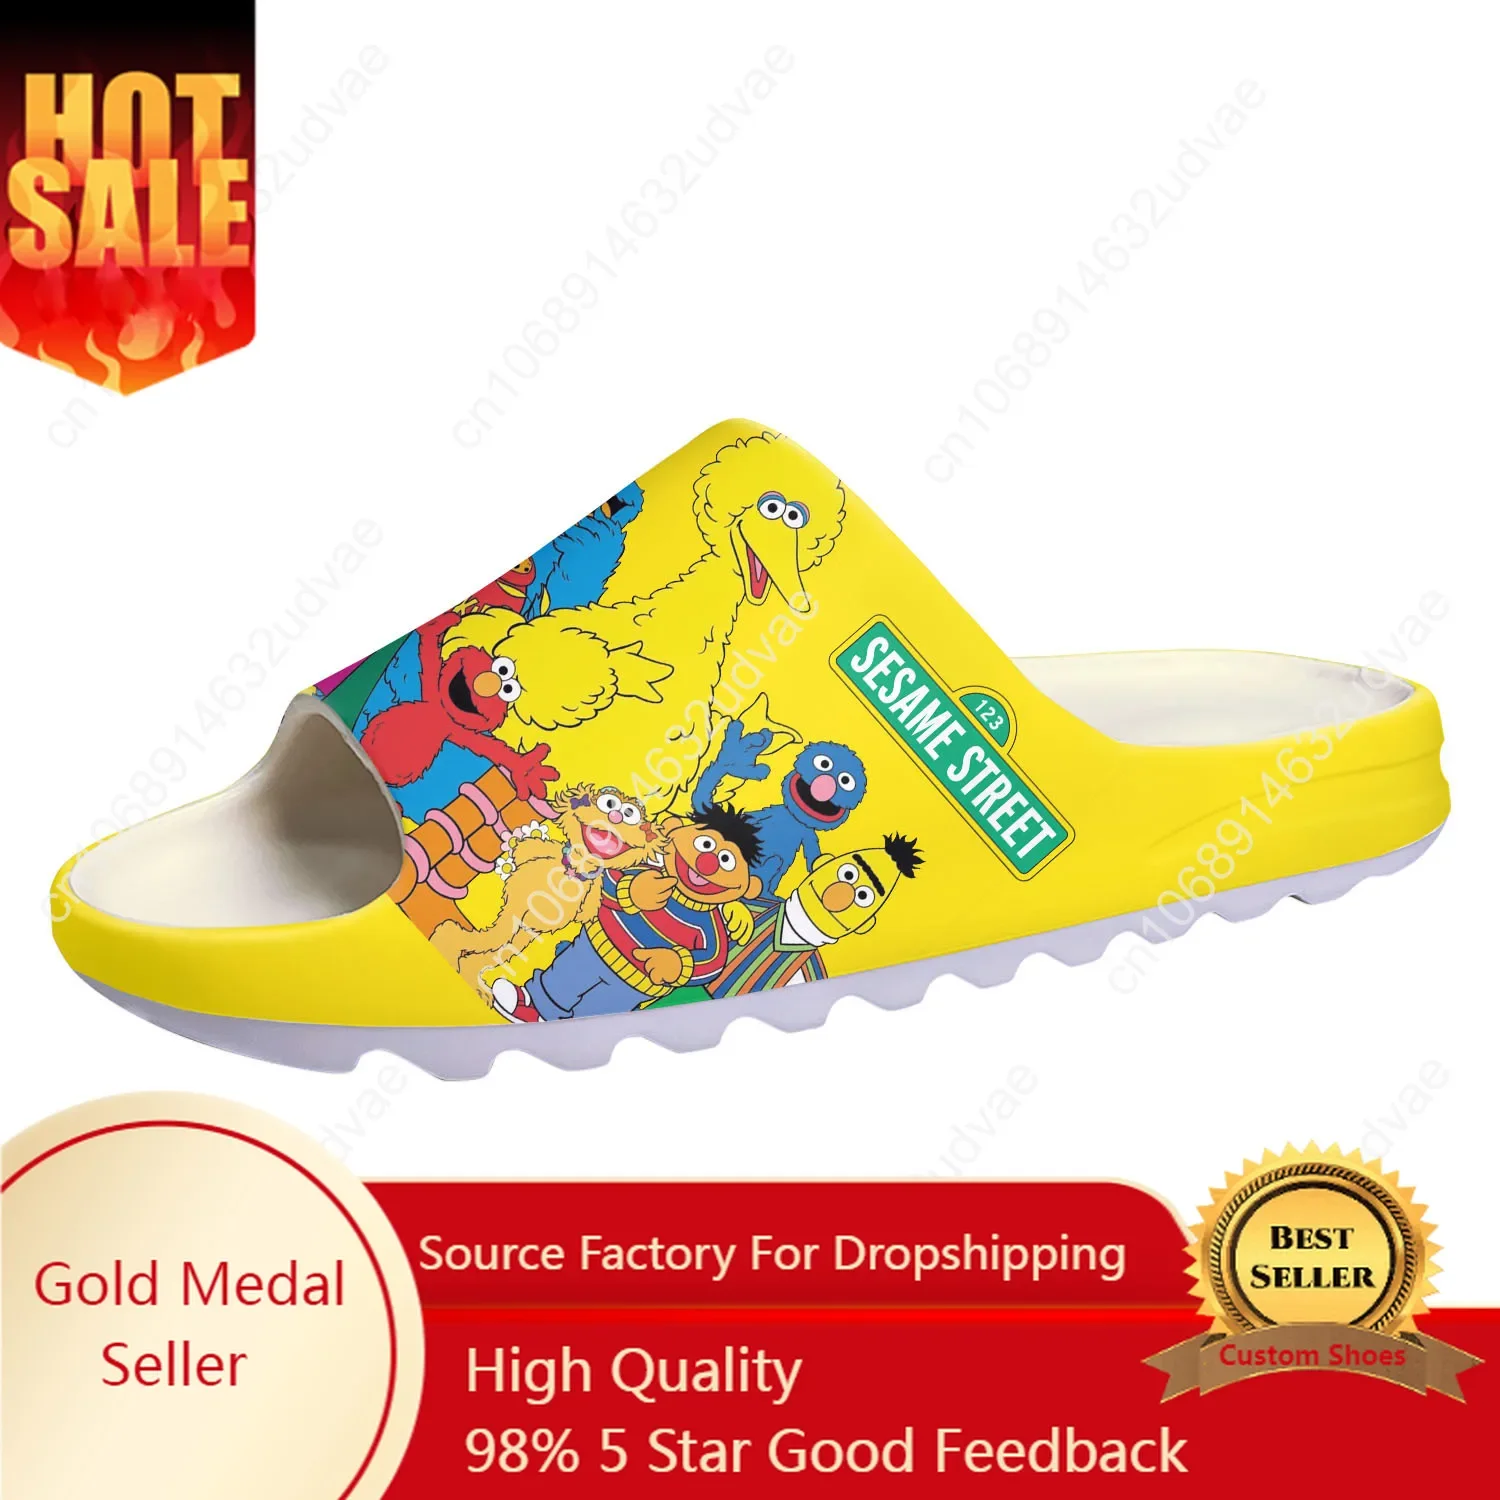 

S-Sesame Cartoon S-Street Anime Soft Sole Sllipers Home Clogs Elmo Customized Water Shoe Men Women Teenager Step On Shit Sandals